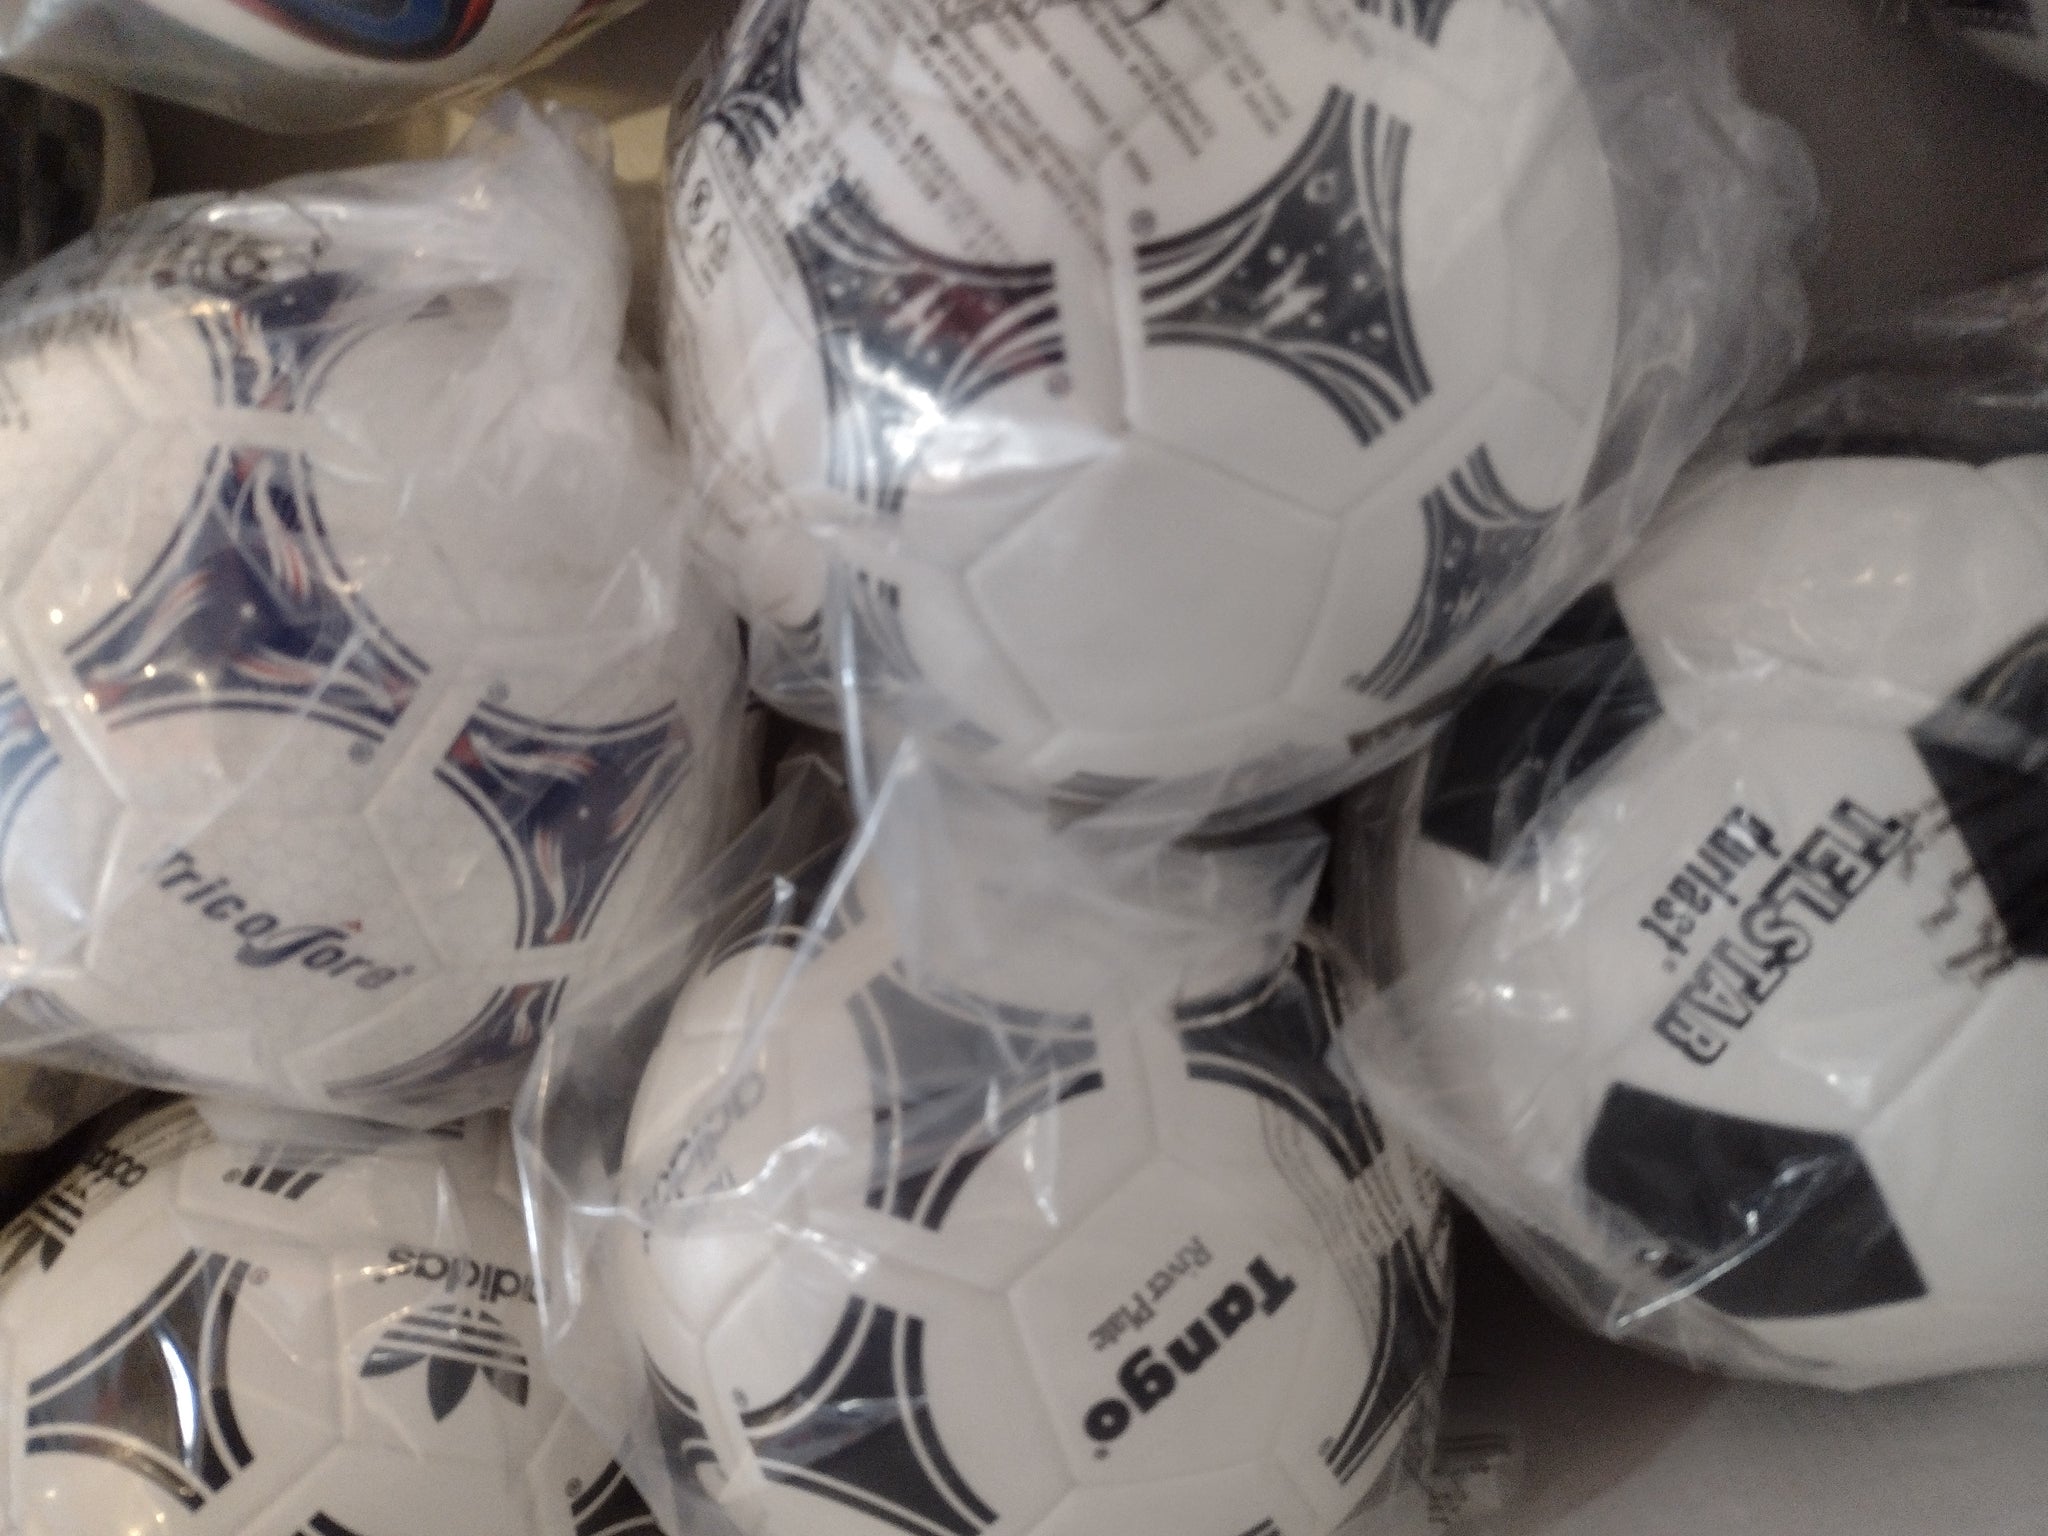 adidas World Cup Historical Mini 14 Ball Set with Box 1970-2022 – Strictly  Soccer Shoppe